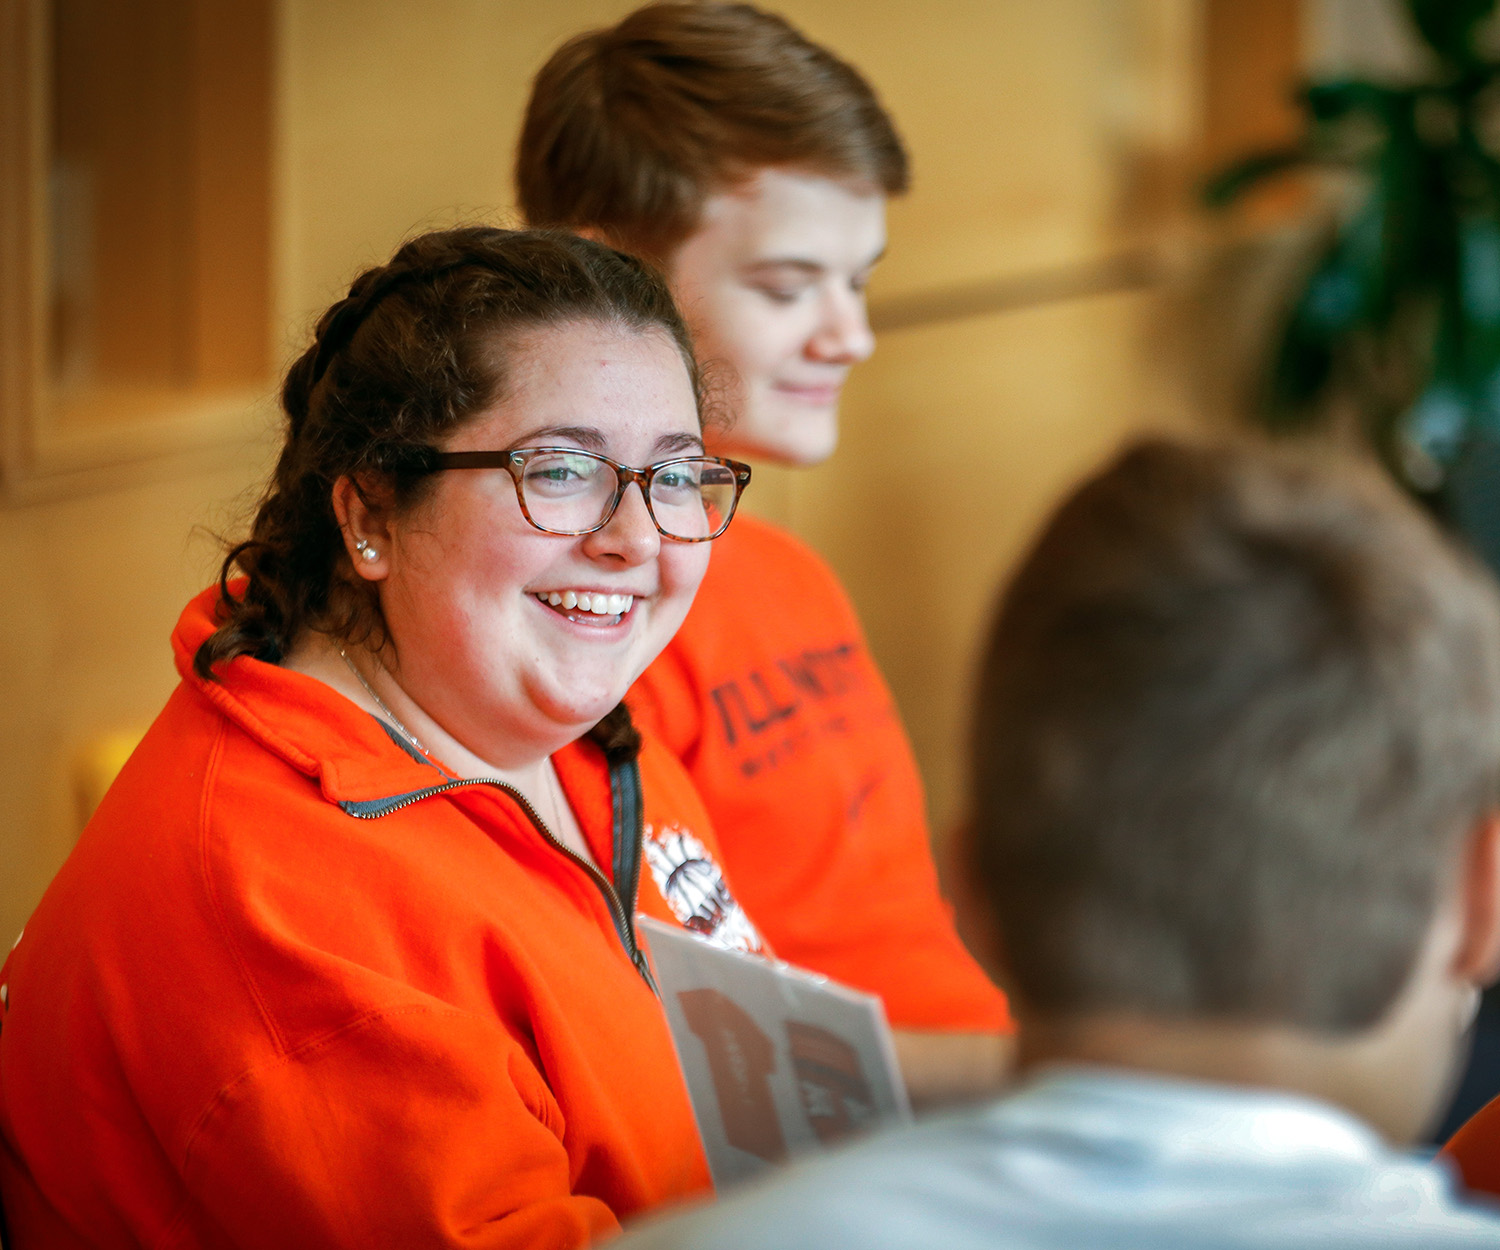 Work-study students helping guide new students in the Ikenberry Dining Hall.